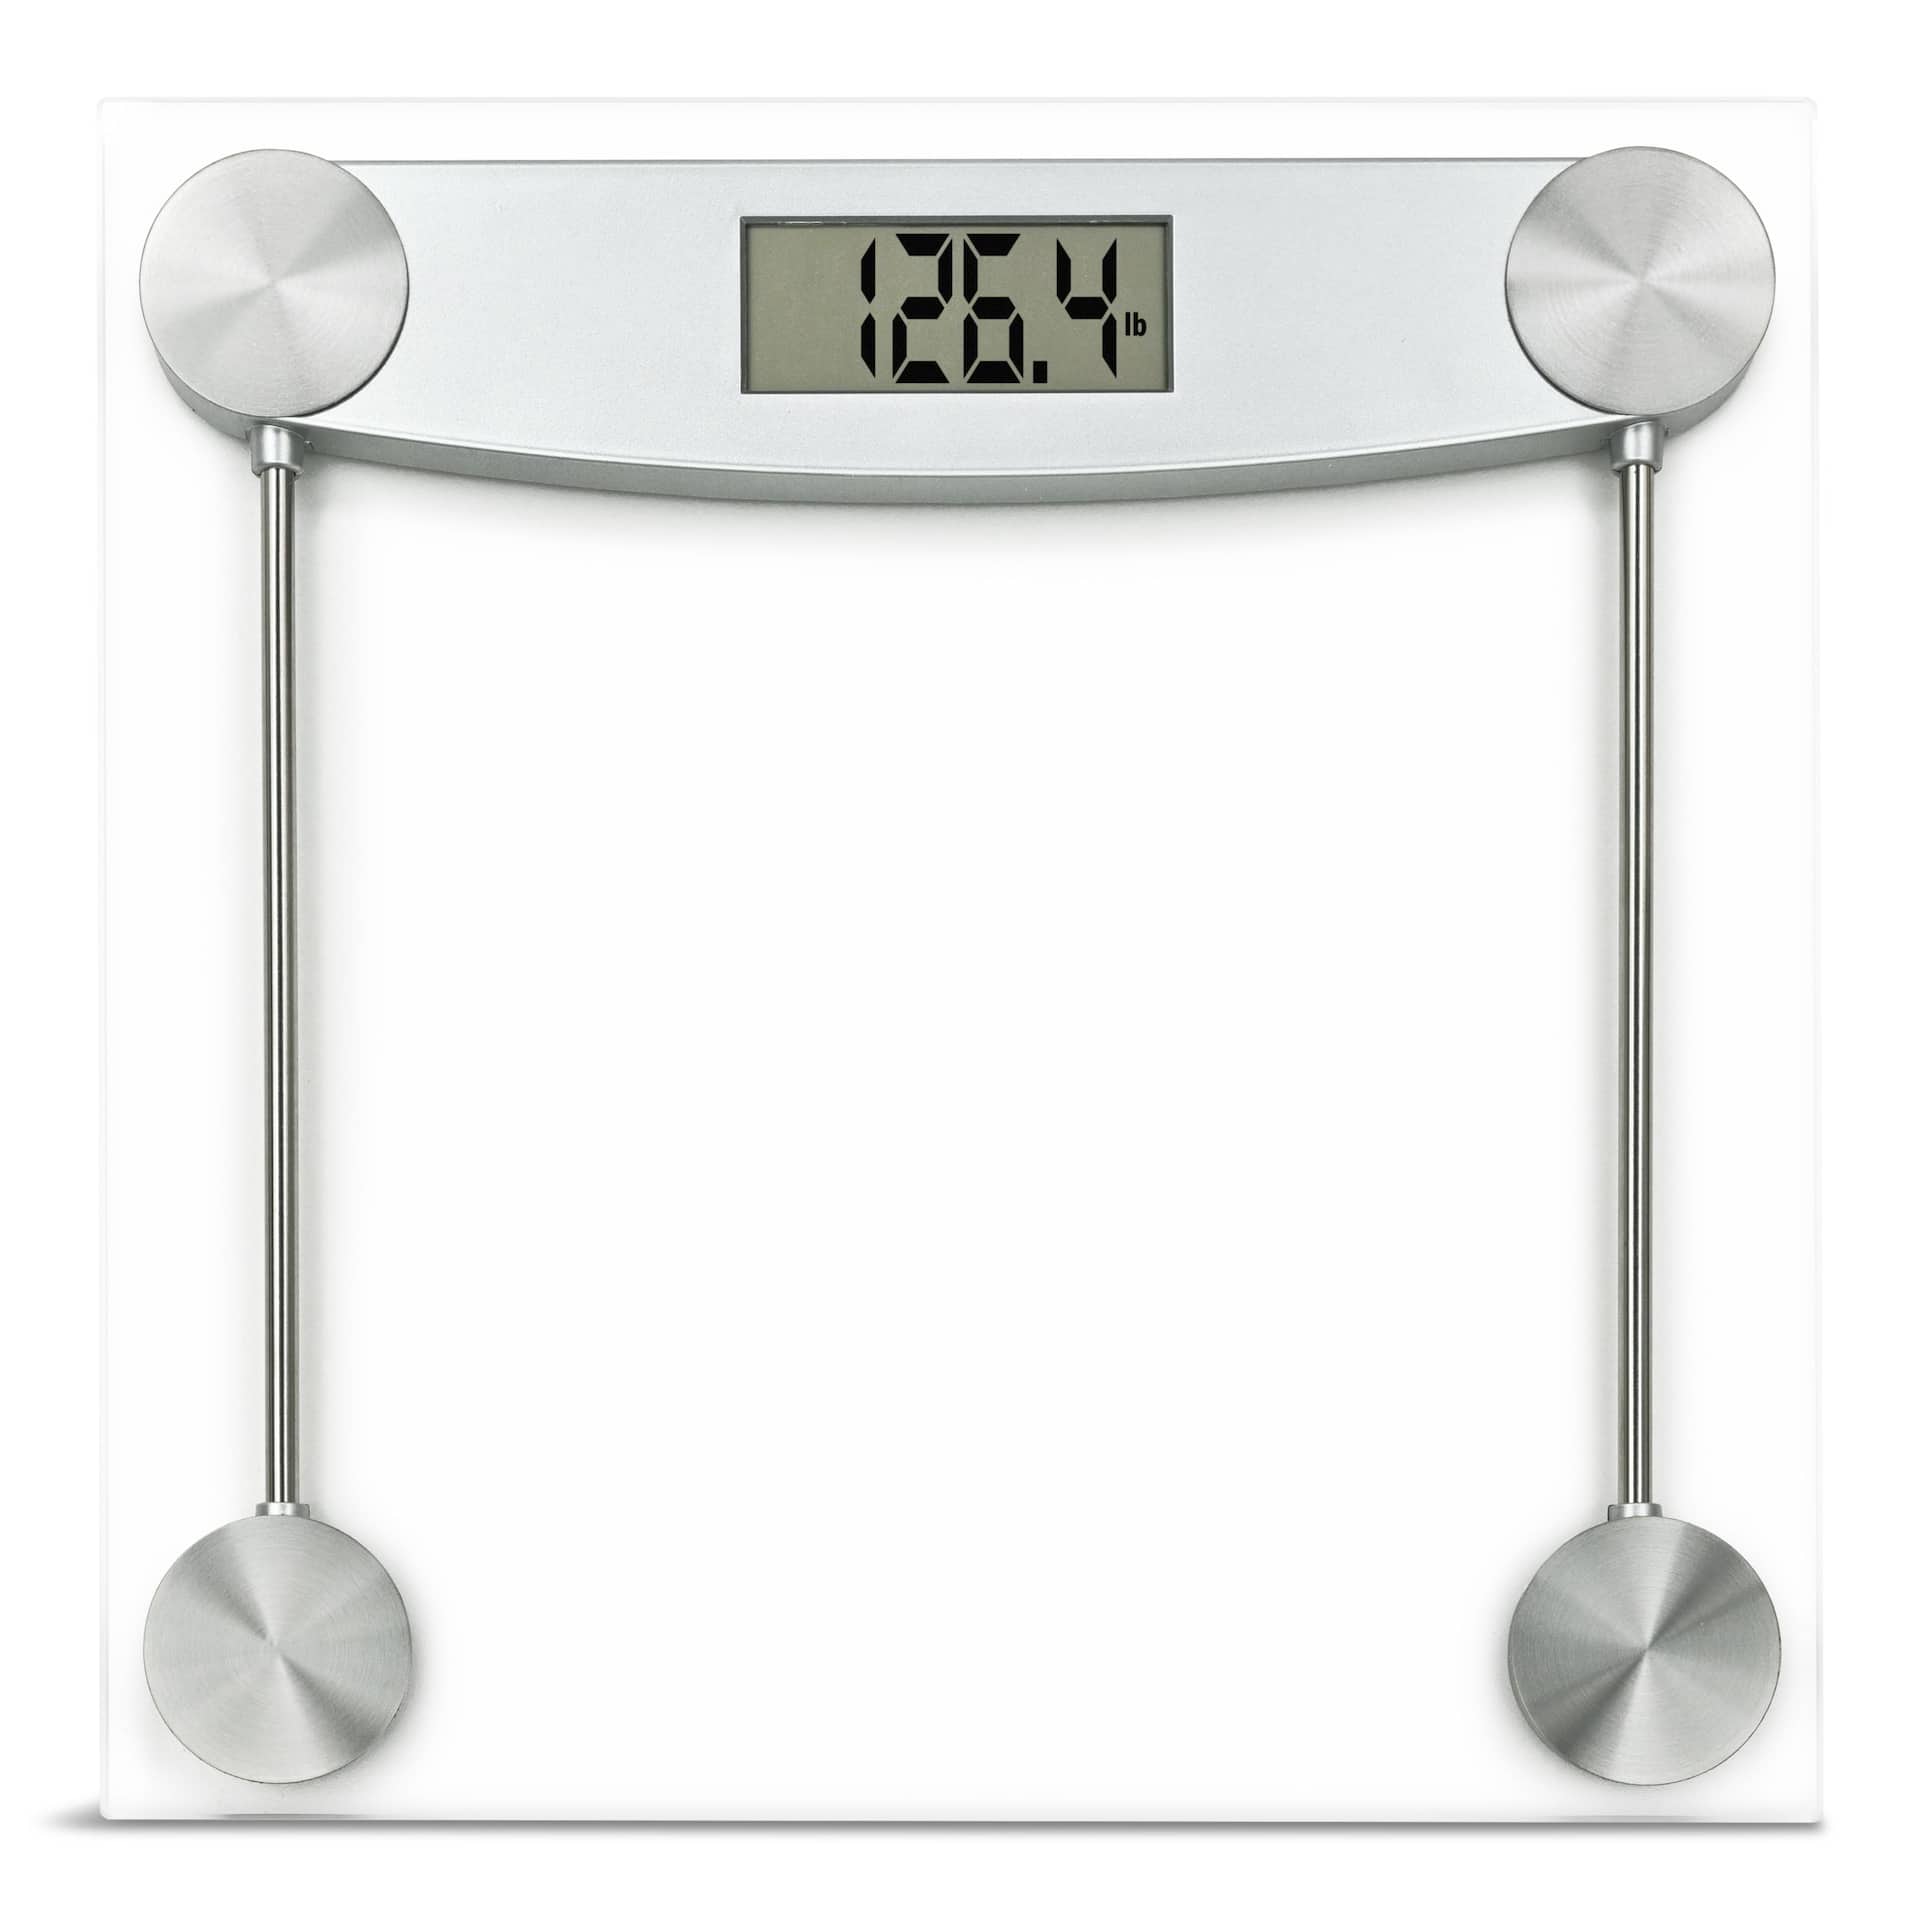 B Well Bluetooth Smart Scale weight scale LED Display Glass